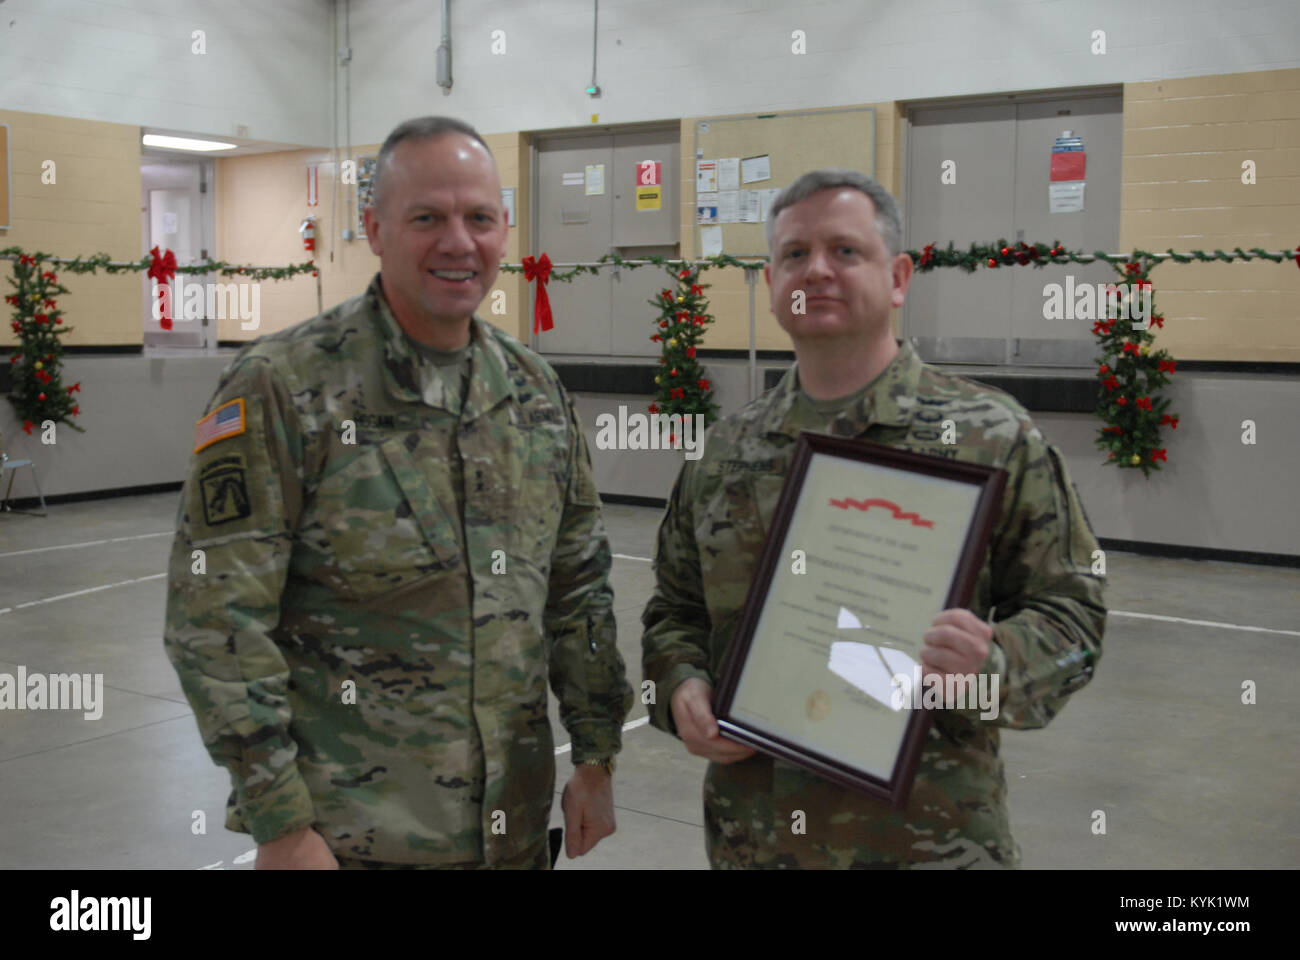 Maj. Gen. Hogan presents the Meritorious Unit Commendation to 63rd TAB Commander Col. Michael Stephens at Wellman Armory, Boone National Guard Center, Frankfort, Ky., Dec. 16, 2016. The Army Meritorious Unit Commendation has been awarded to the 1204th Aviation Support Battalion for meritorious service in support of military operations from 23 August 2011 to 10 August 2012. (U.S. Army National Guard photo by 1st Lt. Michael Reinersman) Stock Photo